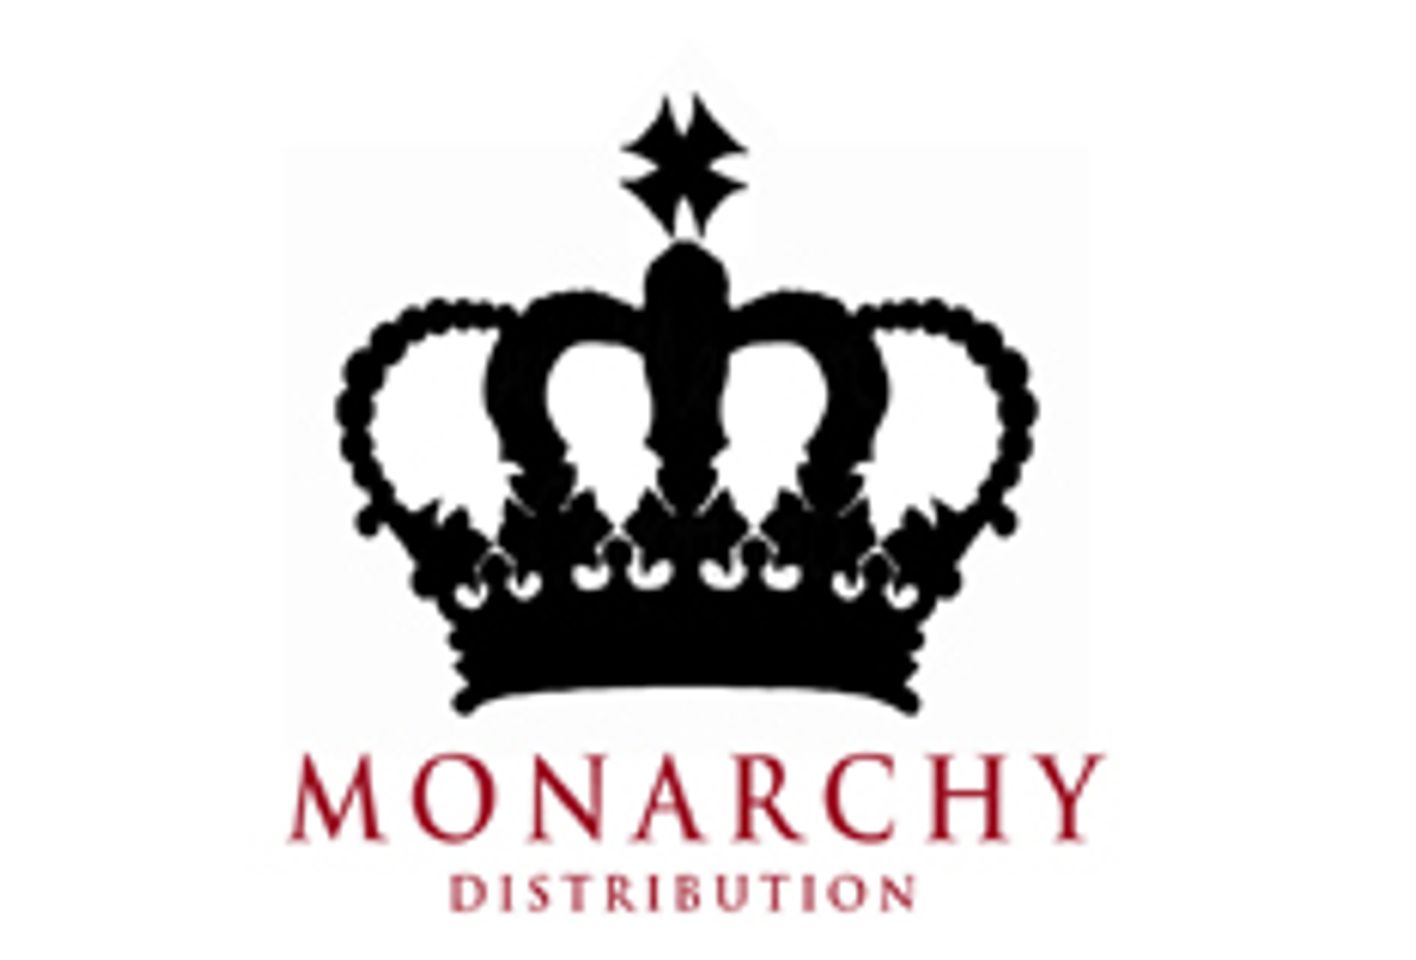 Monarchy to Hold Auditions for 'Polestock' at the Viper Room